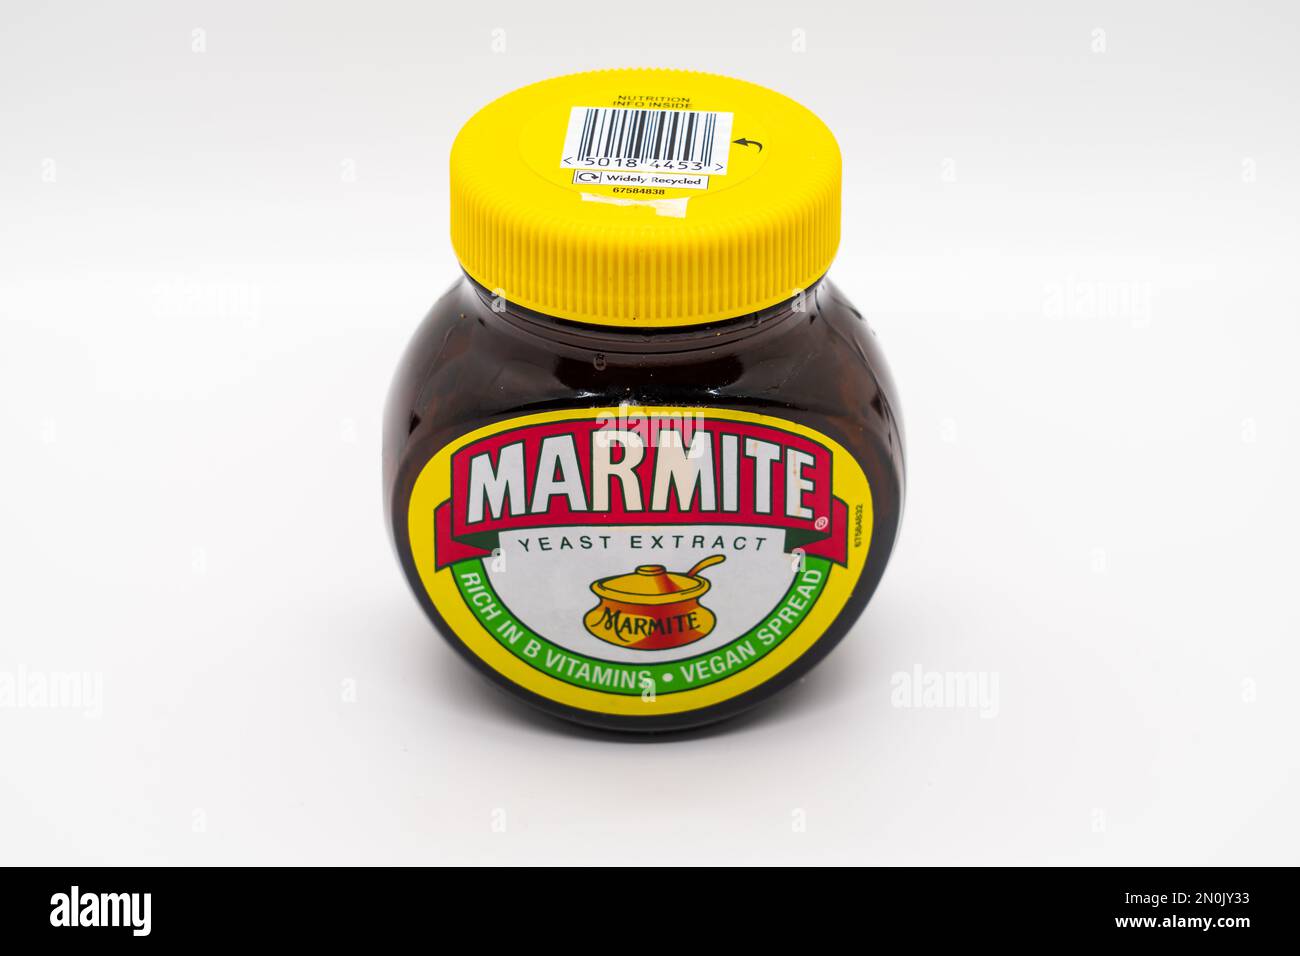 Wolverhampton, England - February 4 2023: Jar of Marmite branded Yeast Extract spread isolated on a white background Stock Photo